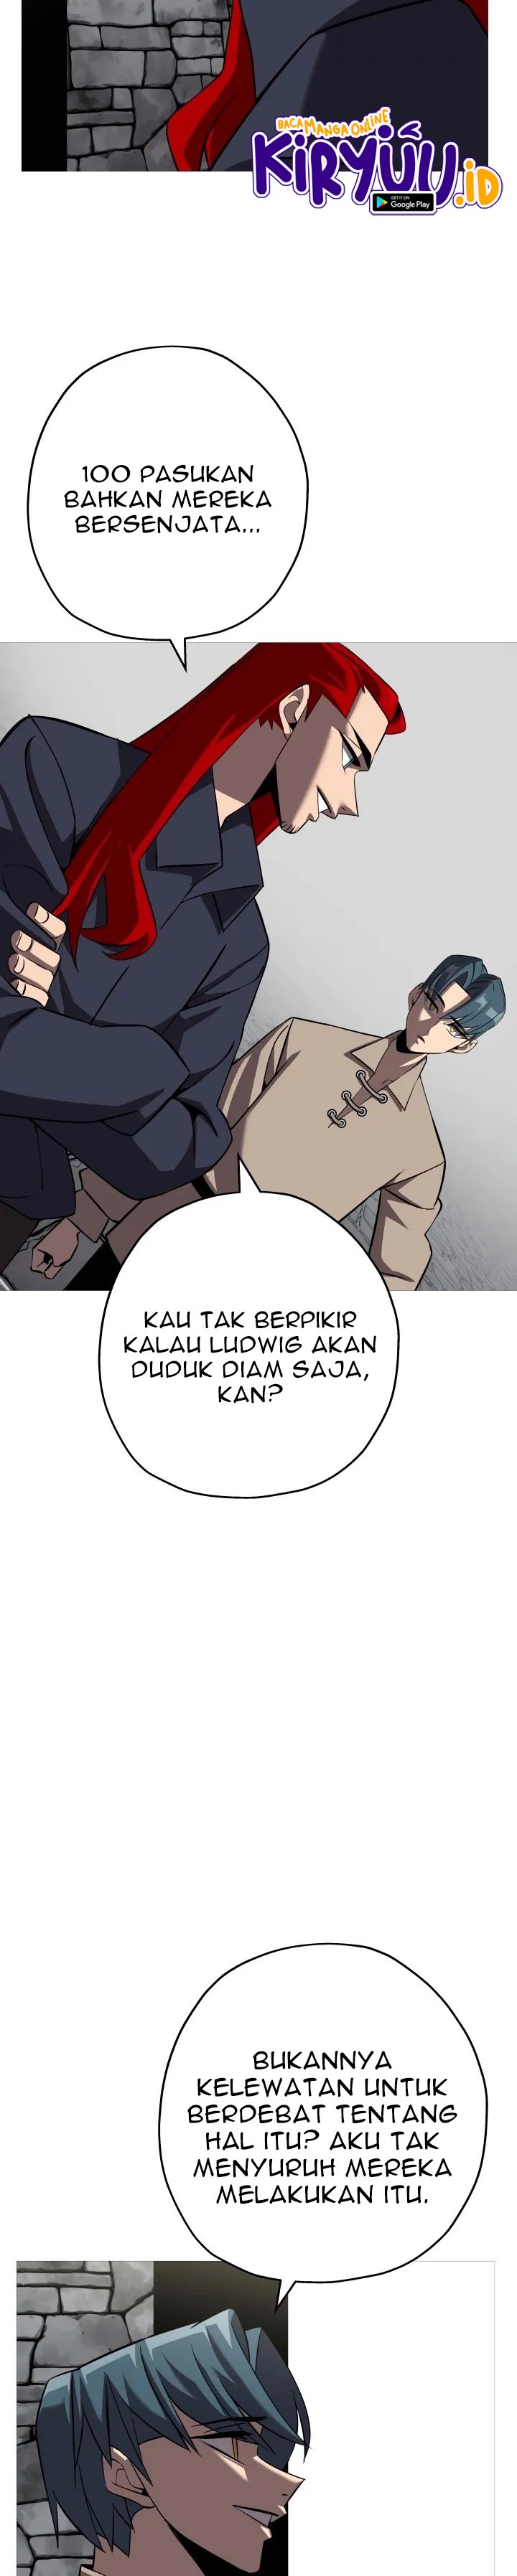 Dilarang COPAS - situs resmi www.mangacanblog.com - Komik the story of a low rank soldier becoming a monarch 062 - chapter 62 63 Indonesia the story of a low rank soldier becoming a monarch 062 - chapter 62 Terbaru 2|Baca Manga Komik Indonesia|Mangacan